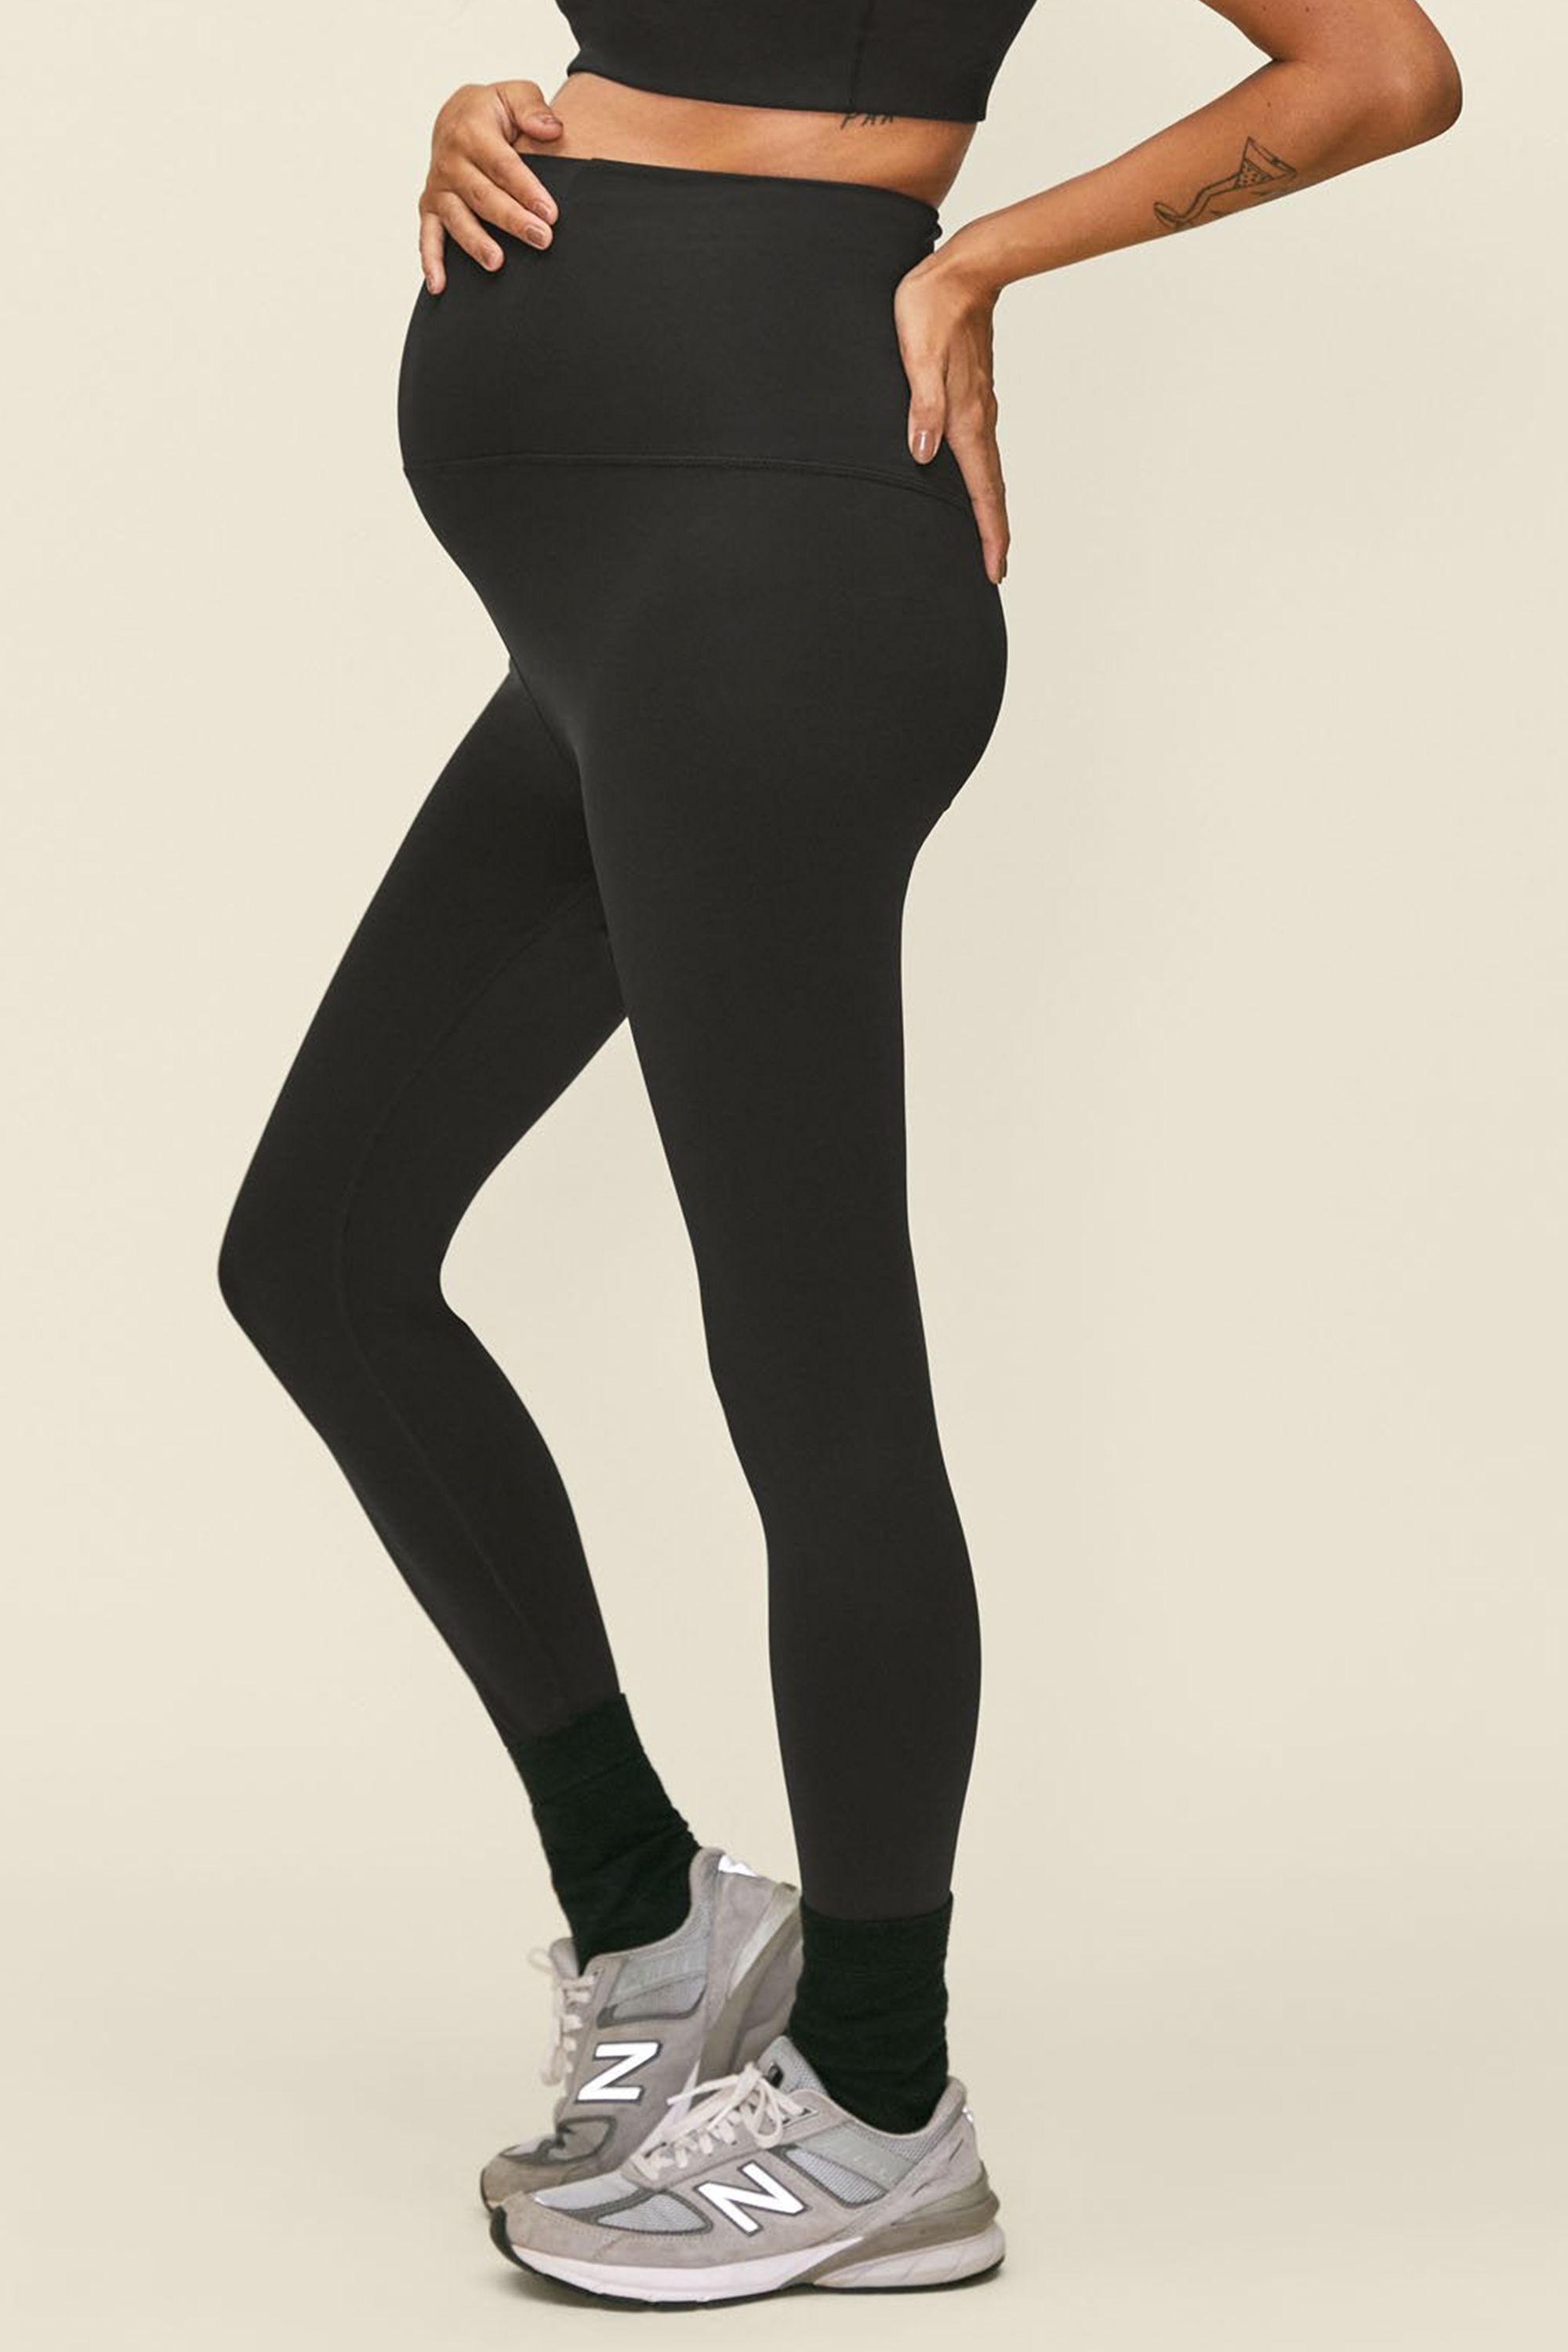 Maternity Support Leggings - Patented Back Support – Leading Lady Inc.